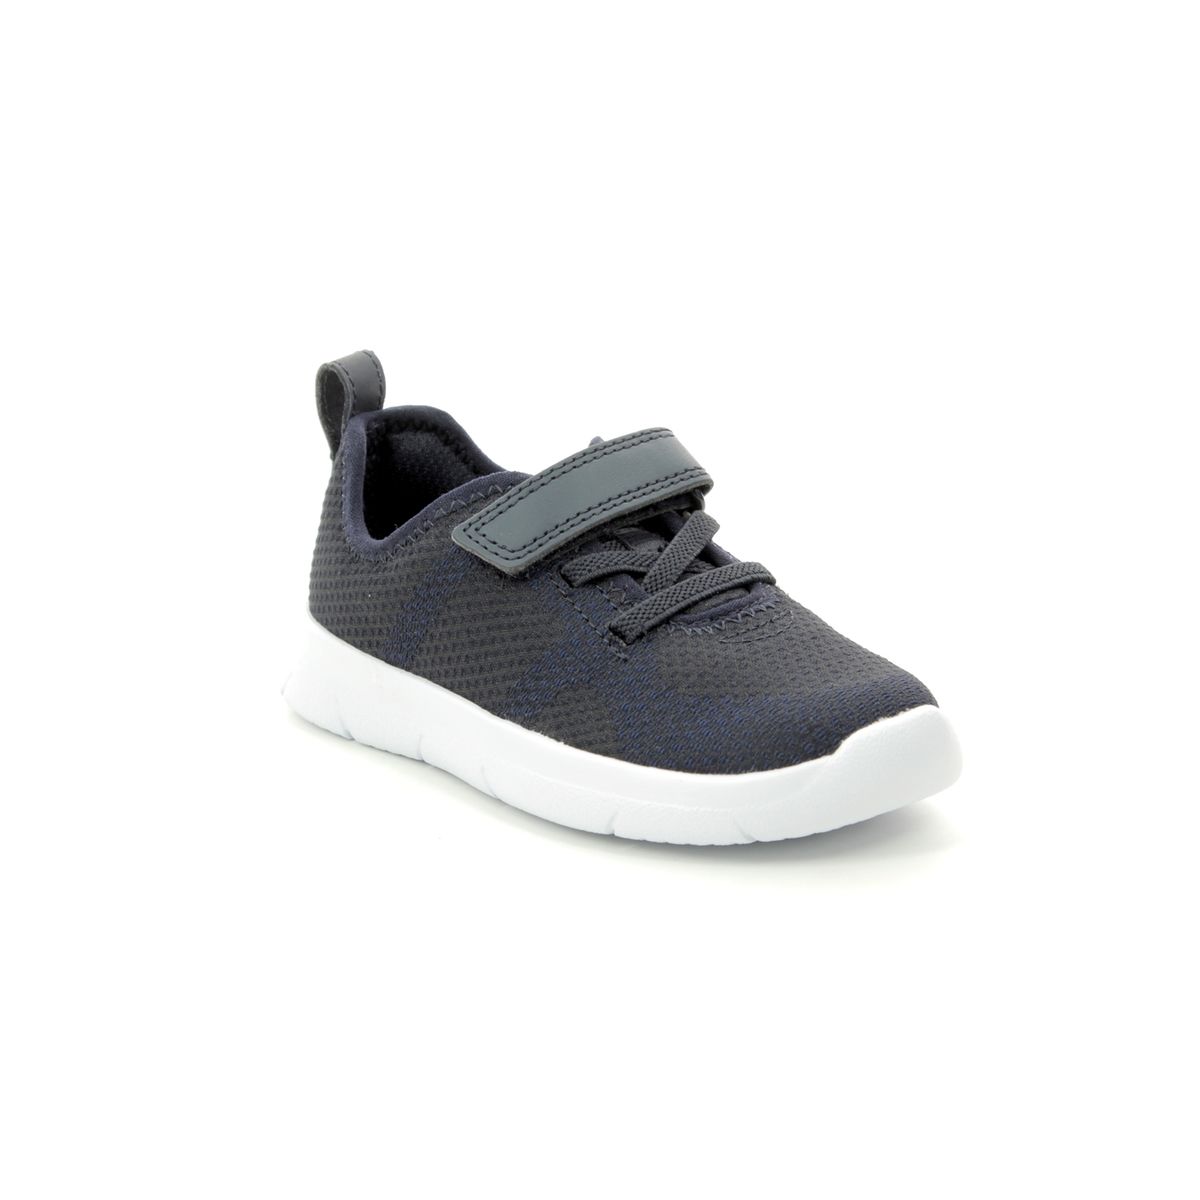 Clarks Ath Flux T Navy Kids Toddler Boys Trainers 4126-97G in a Plain Textile in Size 4.5